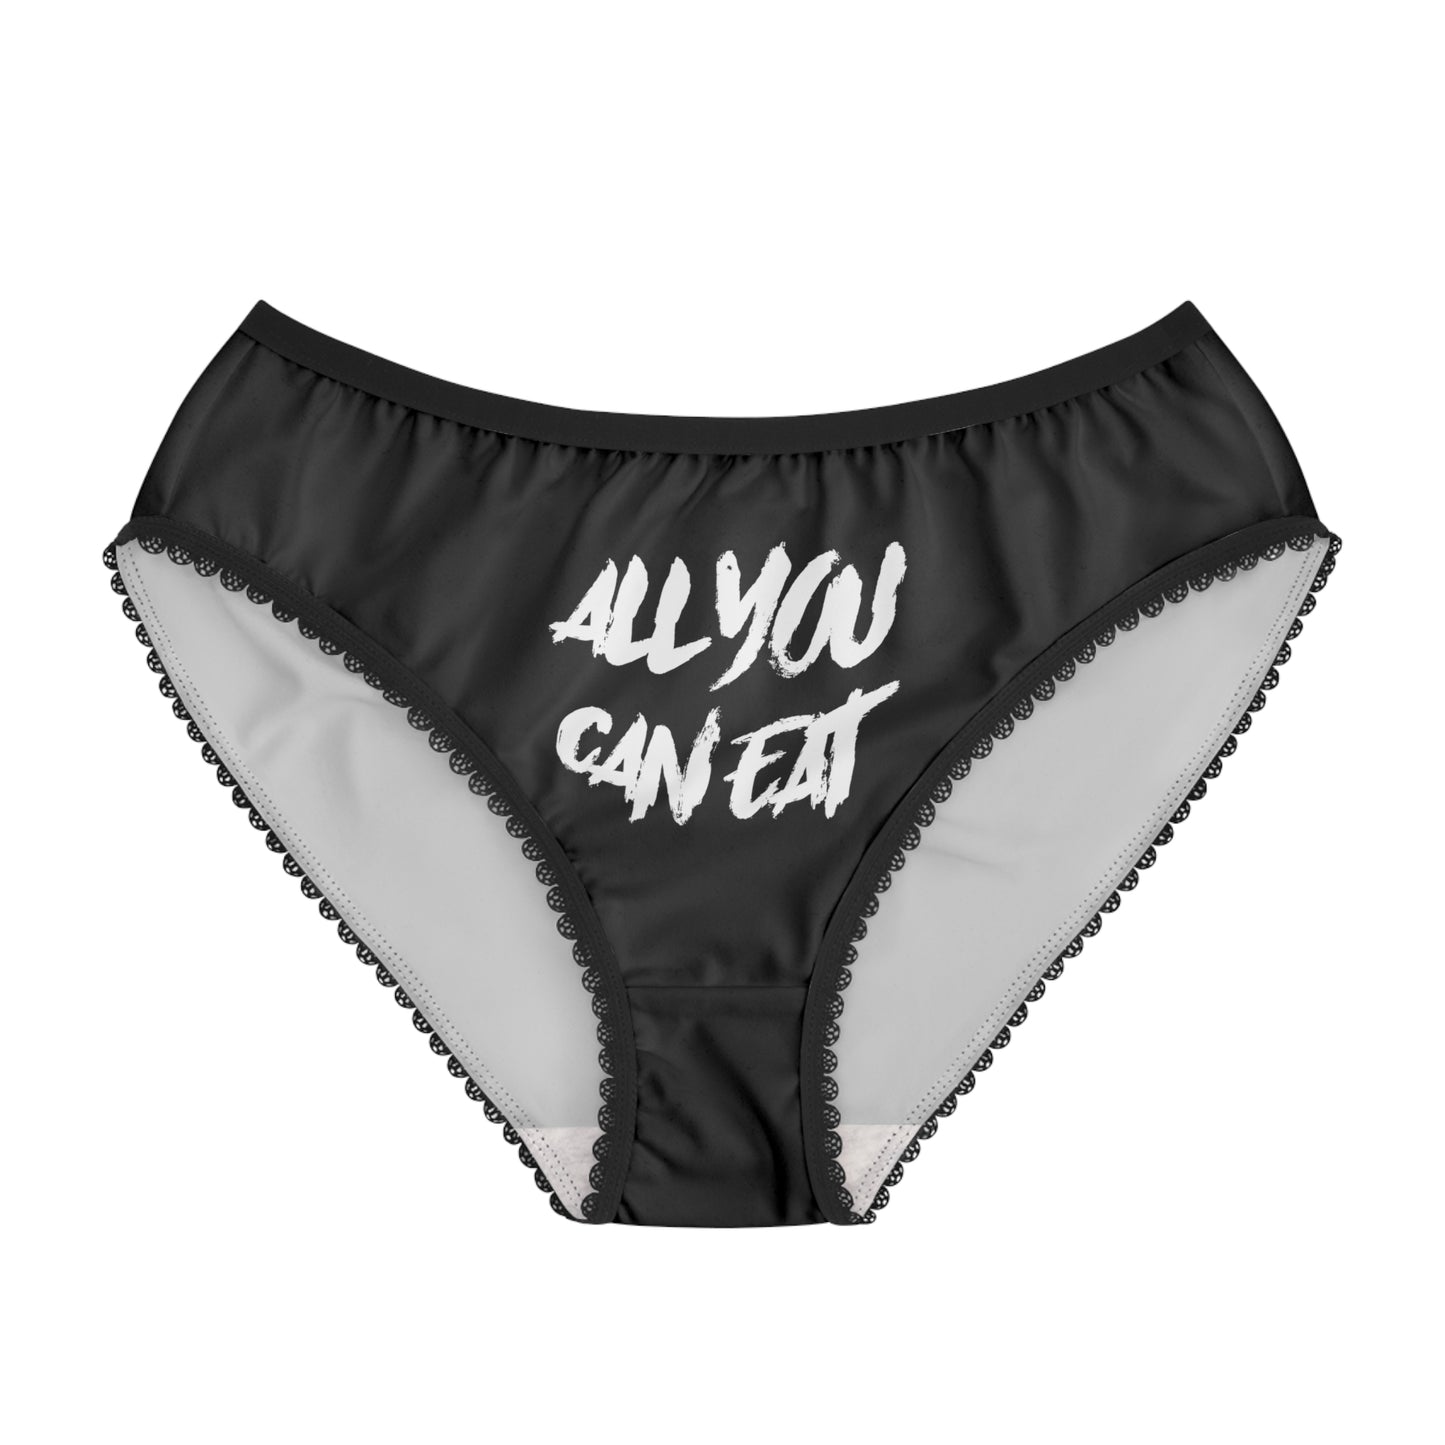 All You Can Eat Women's Briefs, Womens Underwear, Womens Panties, Sexy Lingerie, Wedding Gift, Bachelorette Party